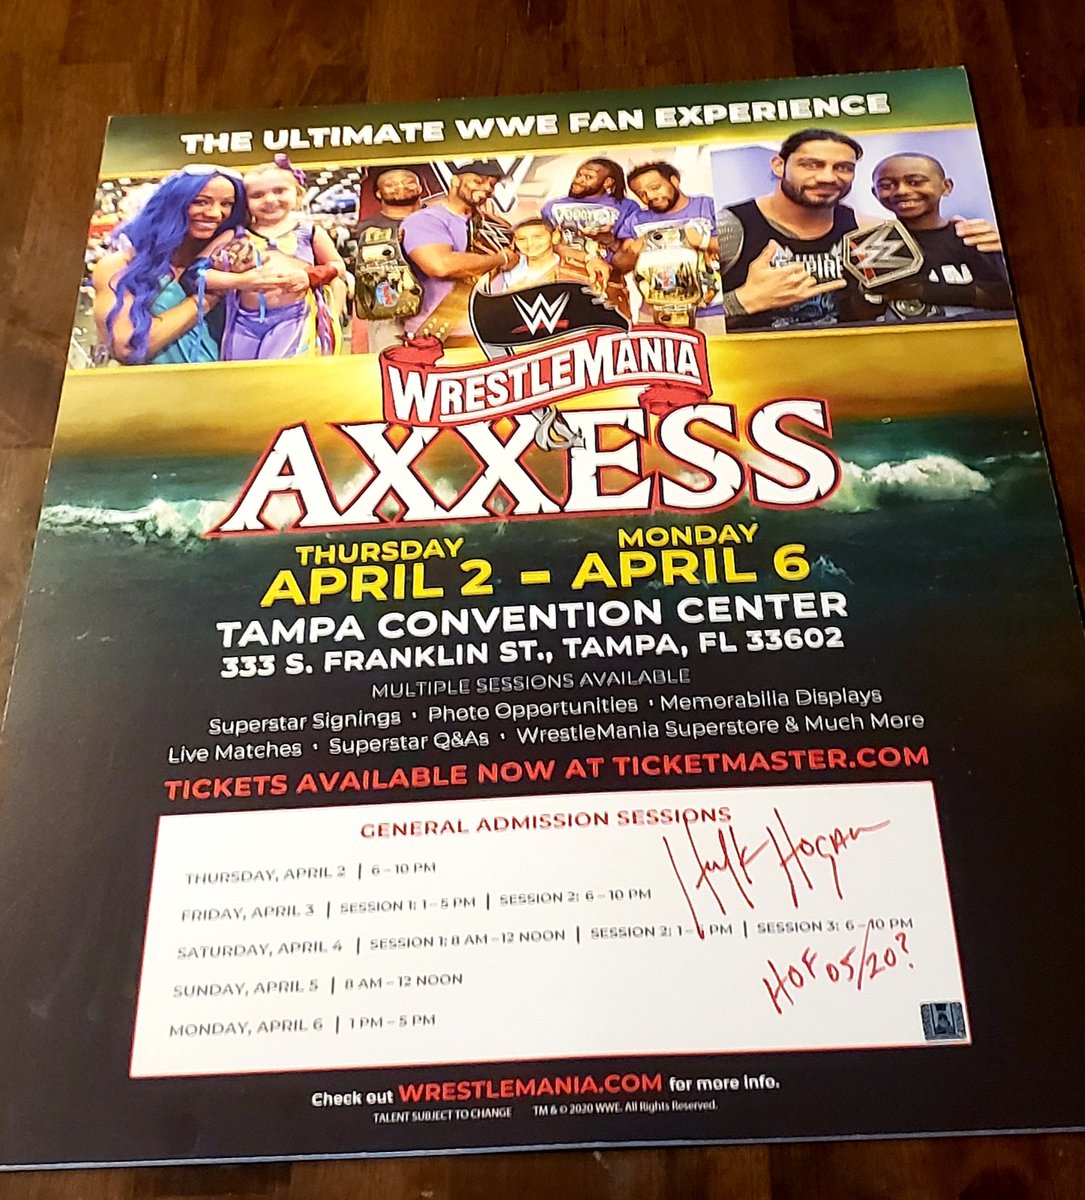 My son and I were saposta go to our 1st wrestlemania in tampa.  We had axxcess tickets to see hulk hogan.  This is the official Axxcess poster from the axxcess that never happened autographed by hulk hogan! #arrivedtoday #hulkhogan #hoganbeachshop #wwe #WWF